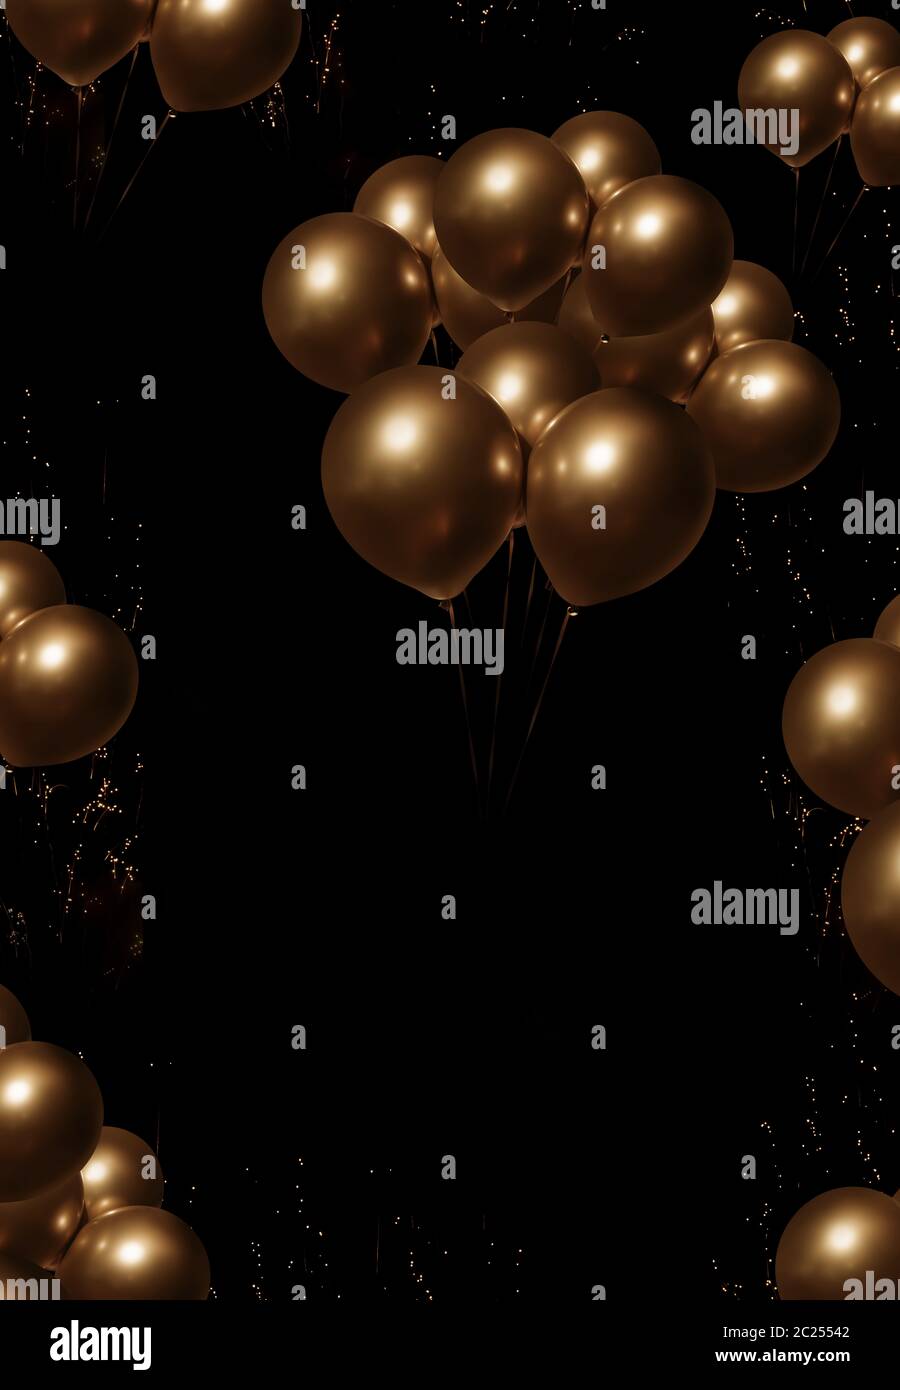 Bunch of golden balloons on night sky for a background Stock Photo